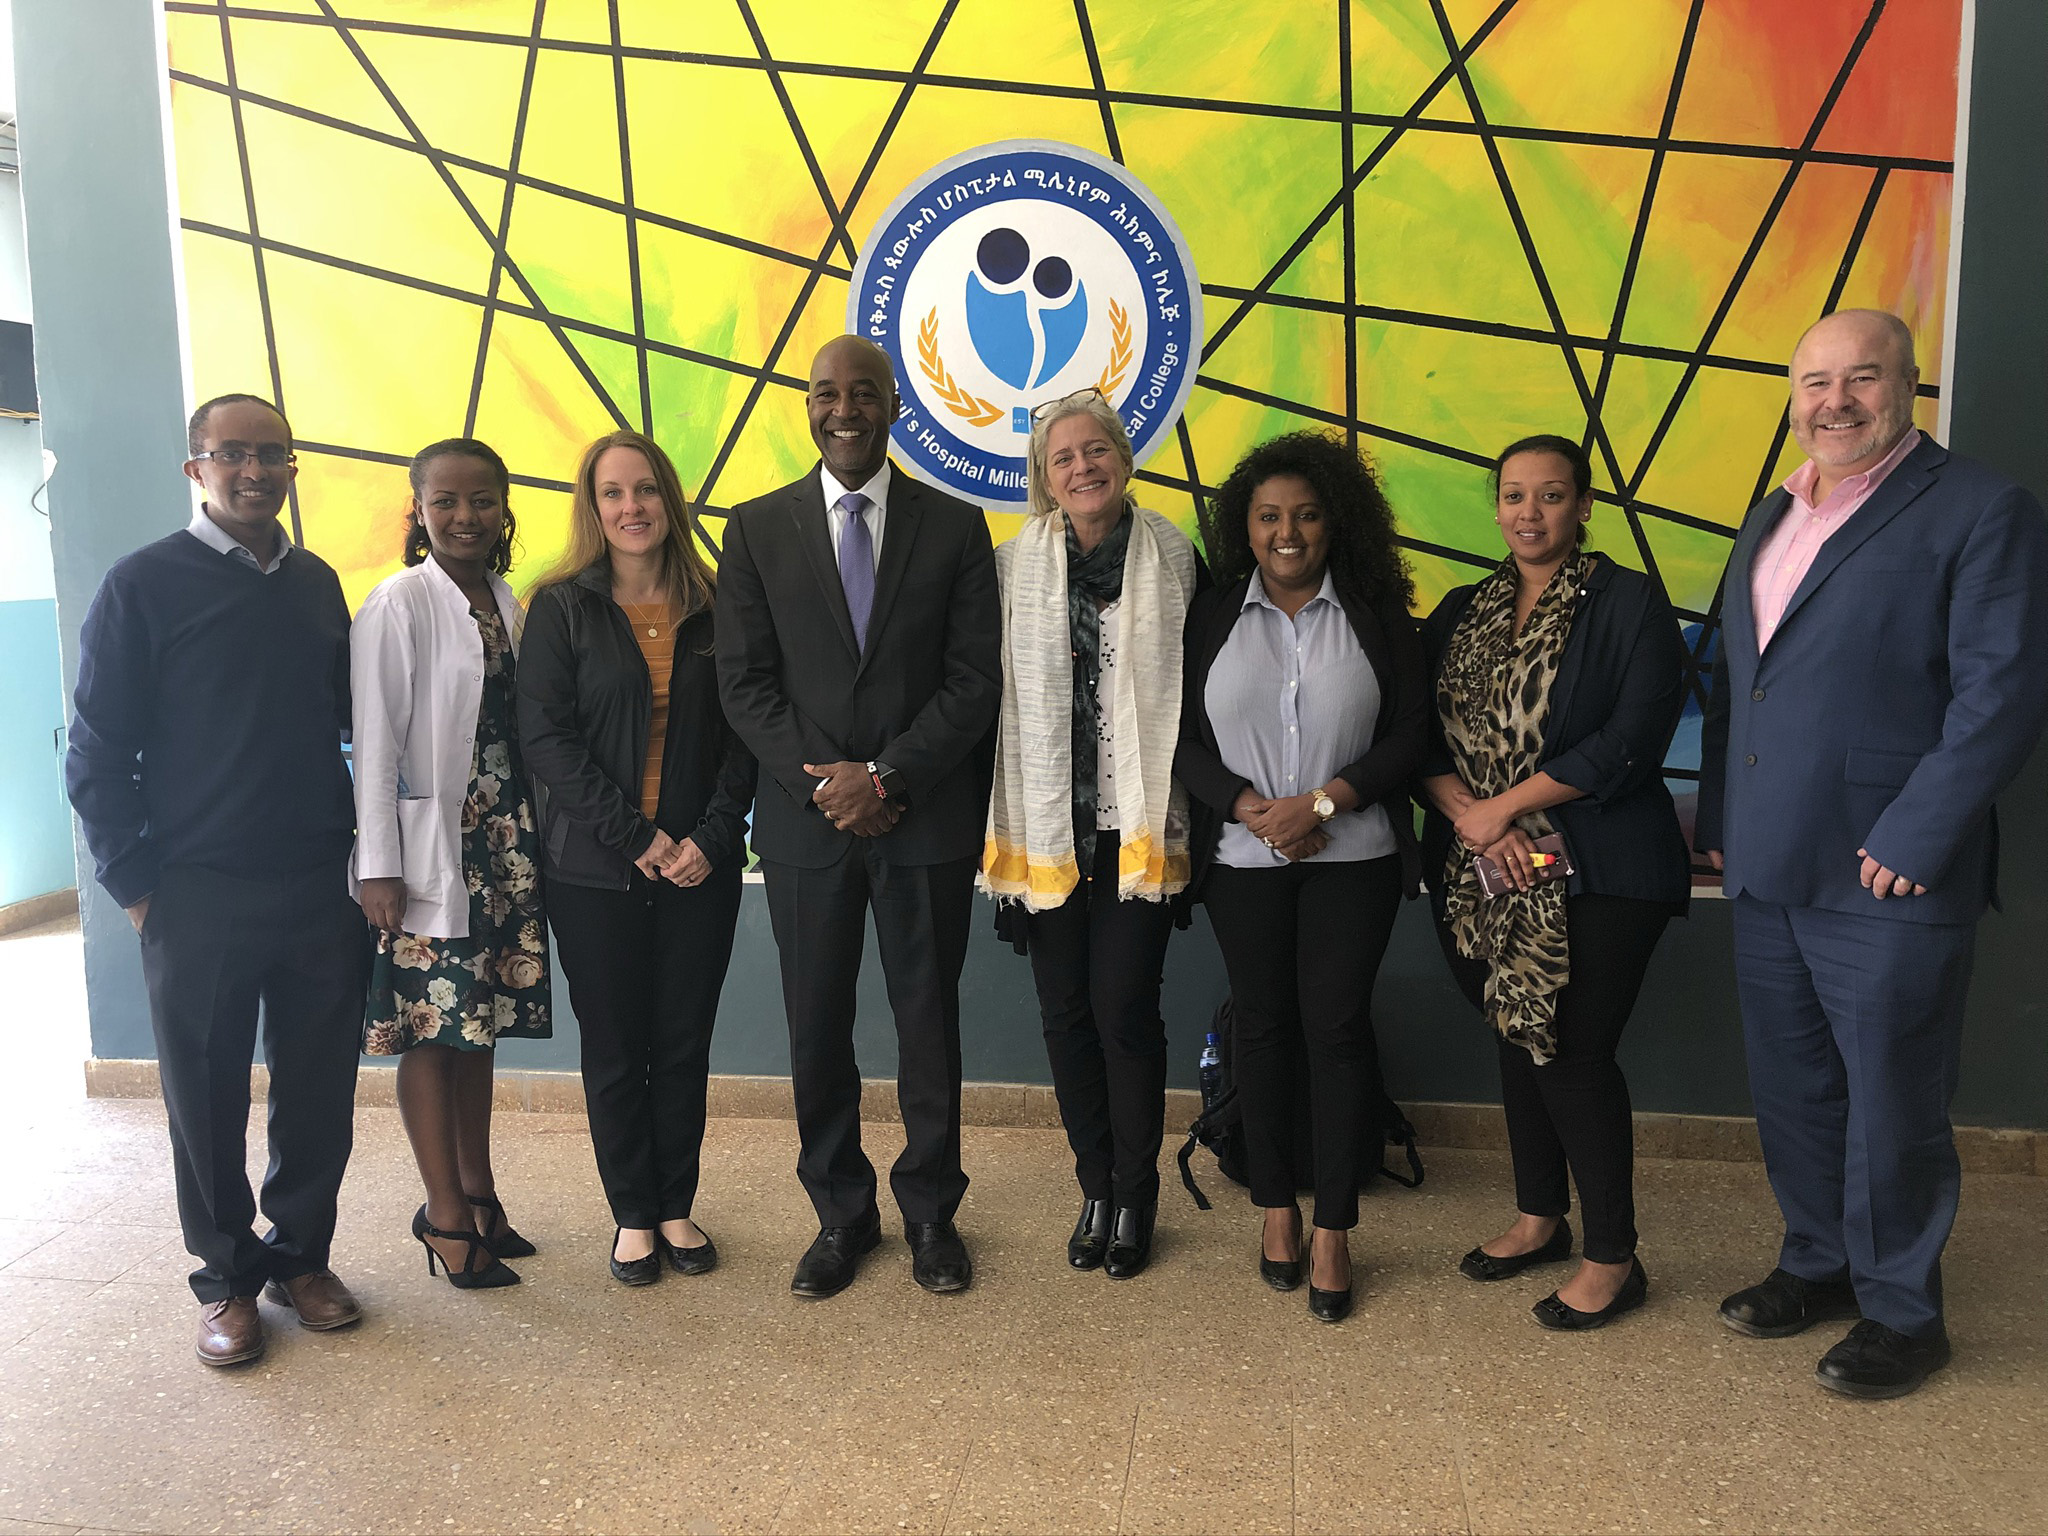 Michigan Public Health’s Berhanu Gebremeskal, DuBois Bowman, Rivet Amico, Amy Sarigiannis and Gary Harper pose for a photo with members from St. Paul’s Hospital Millennium Medical College